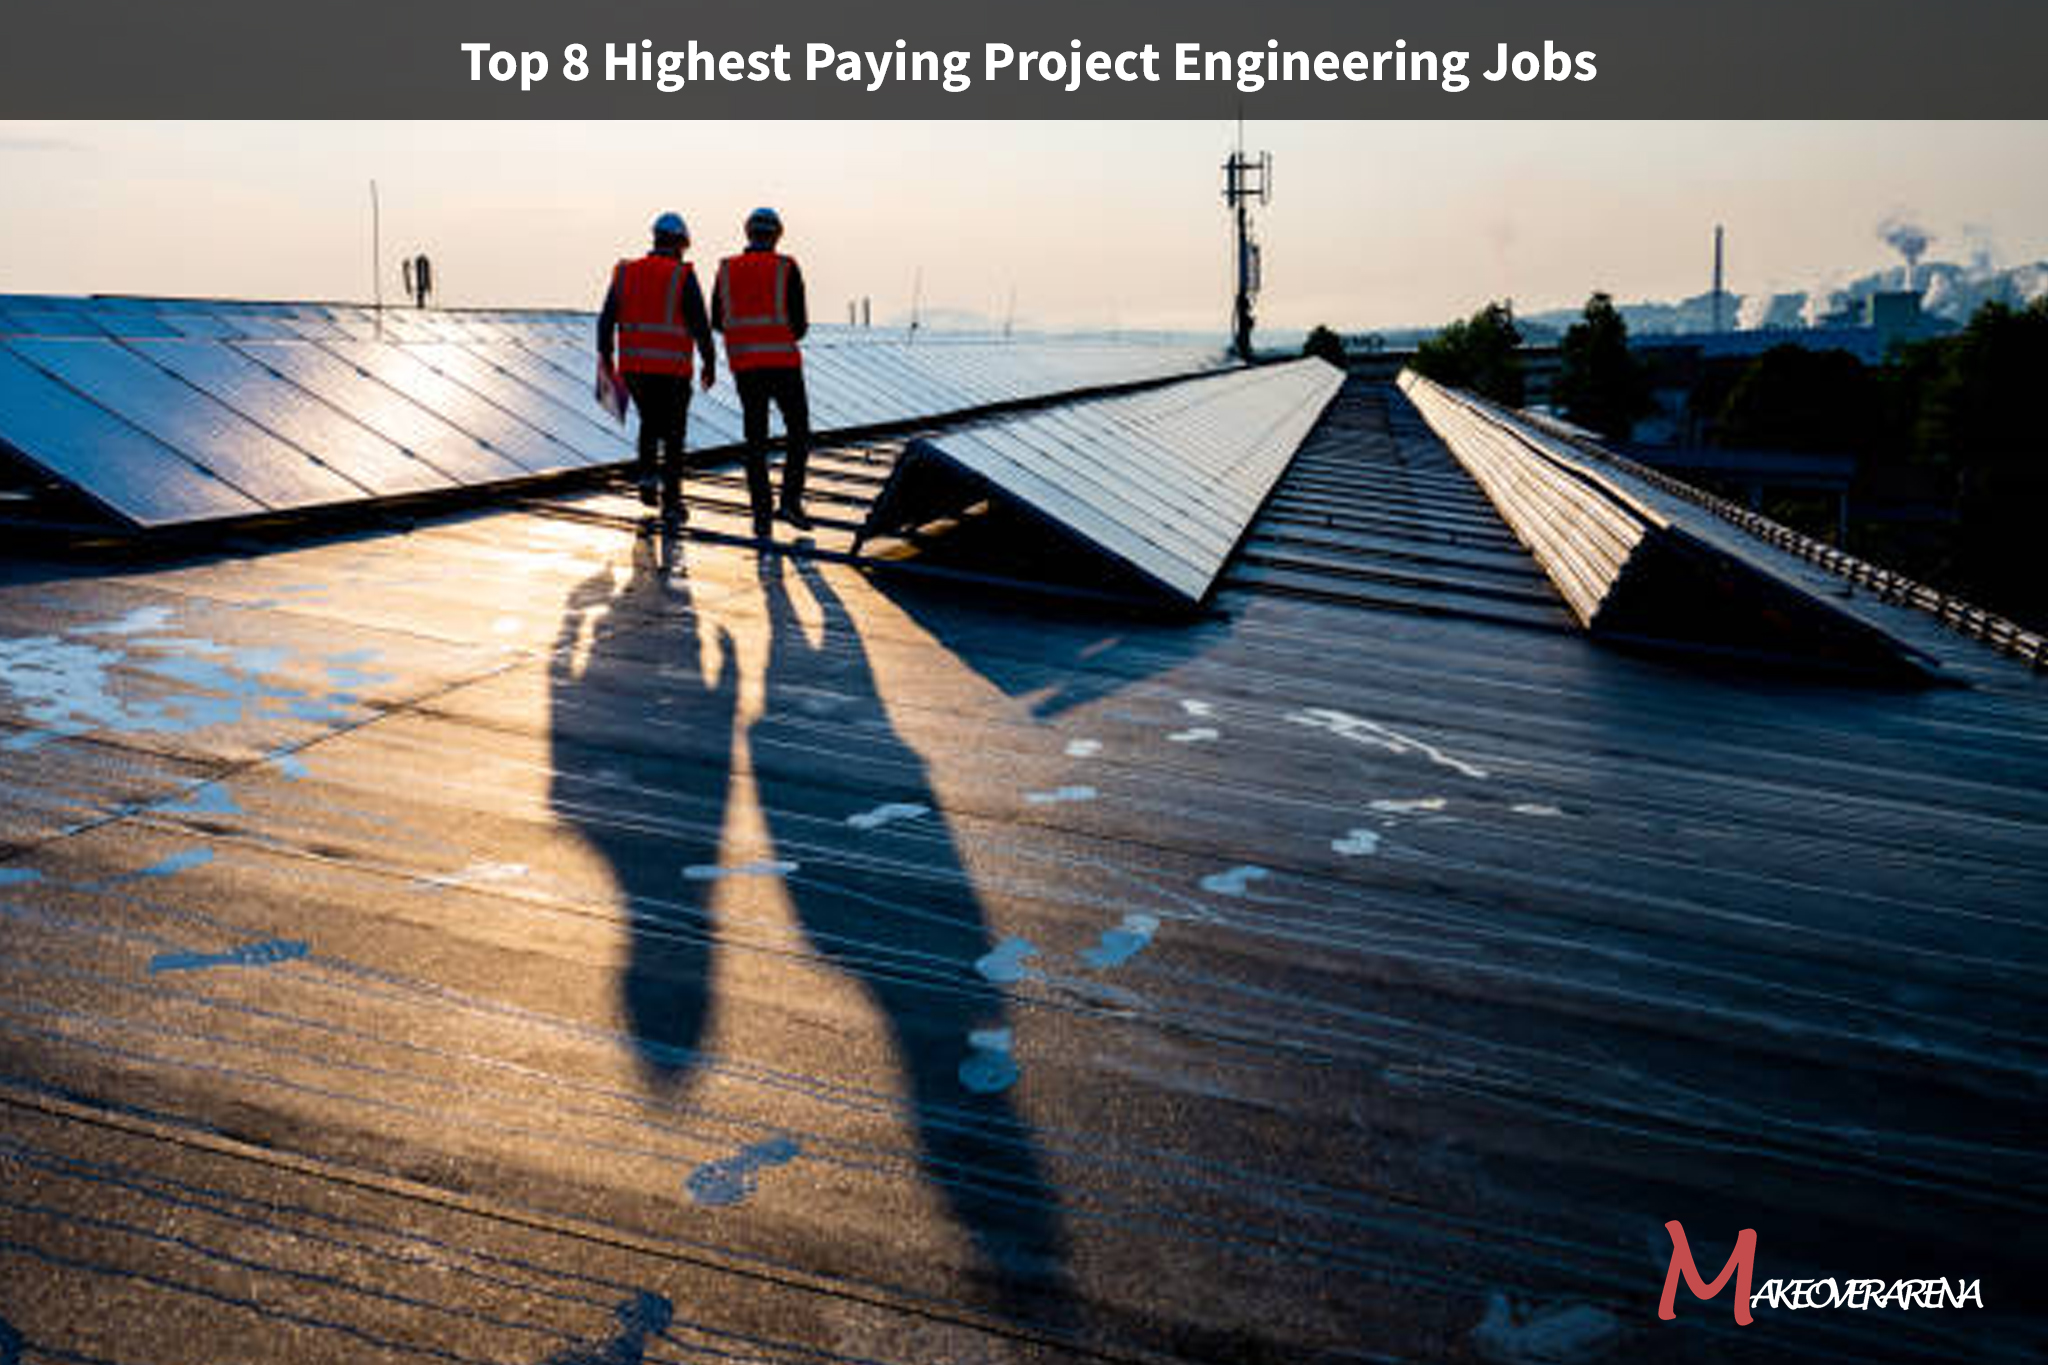 Top 8 Highest Paying Project Engineering Jobs